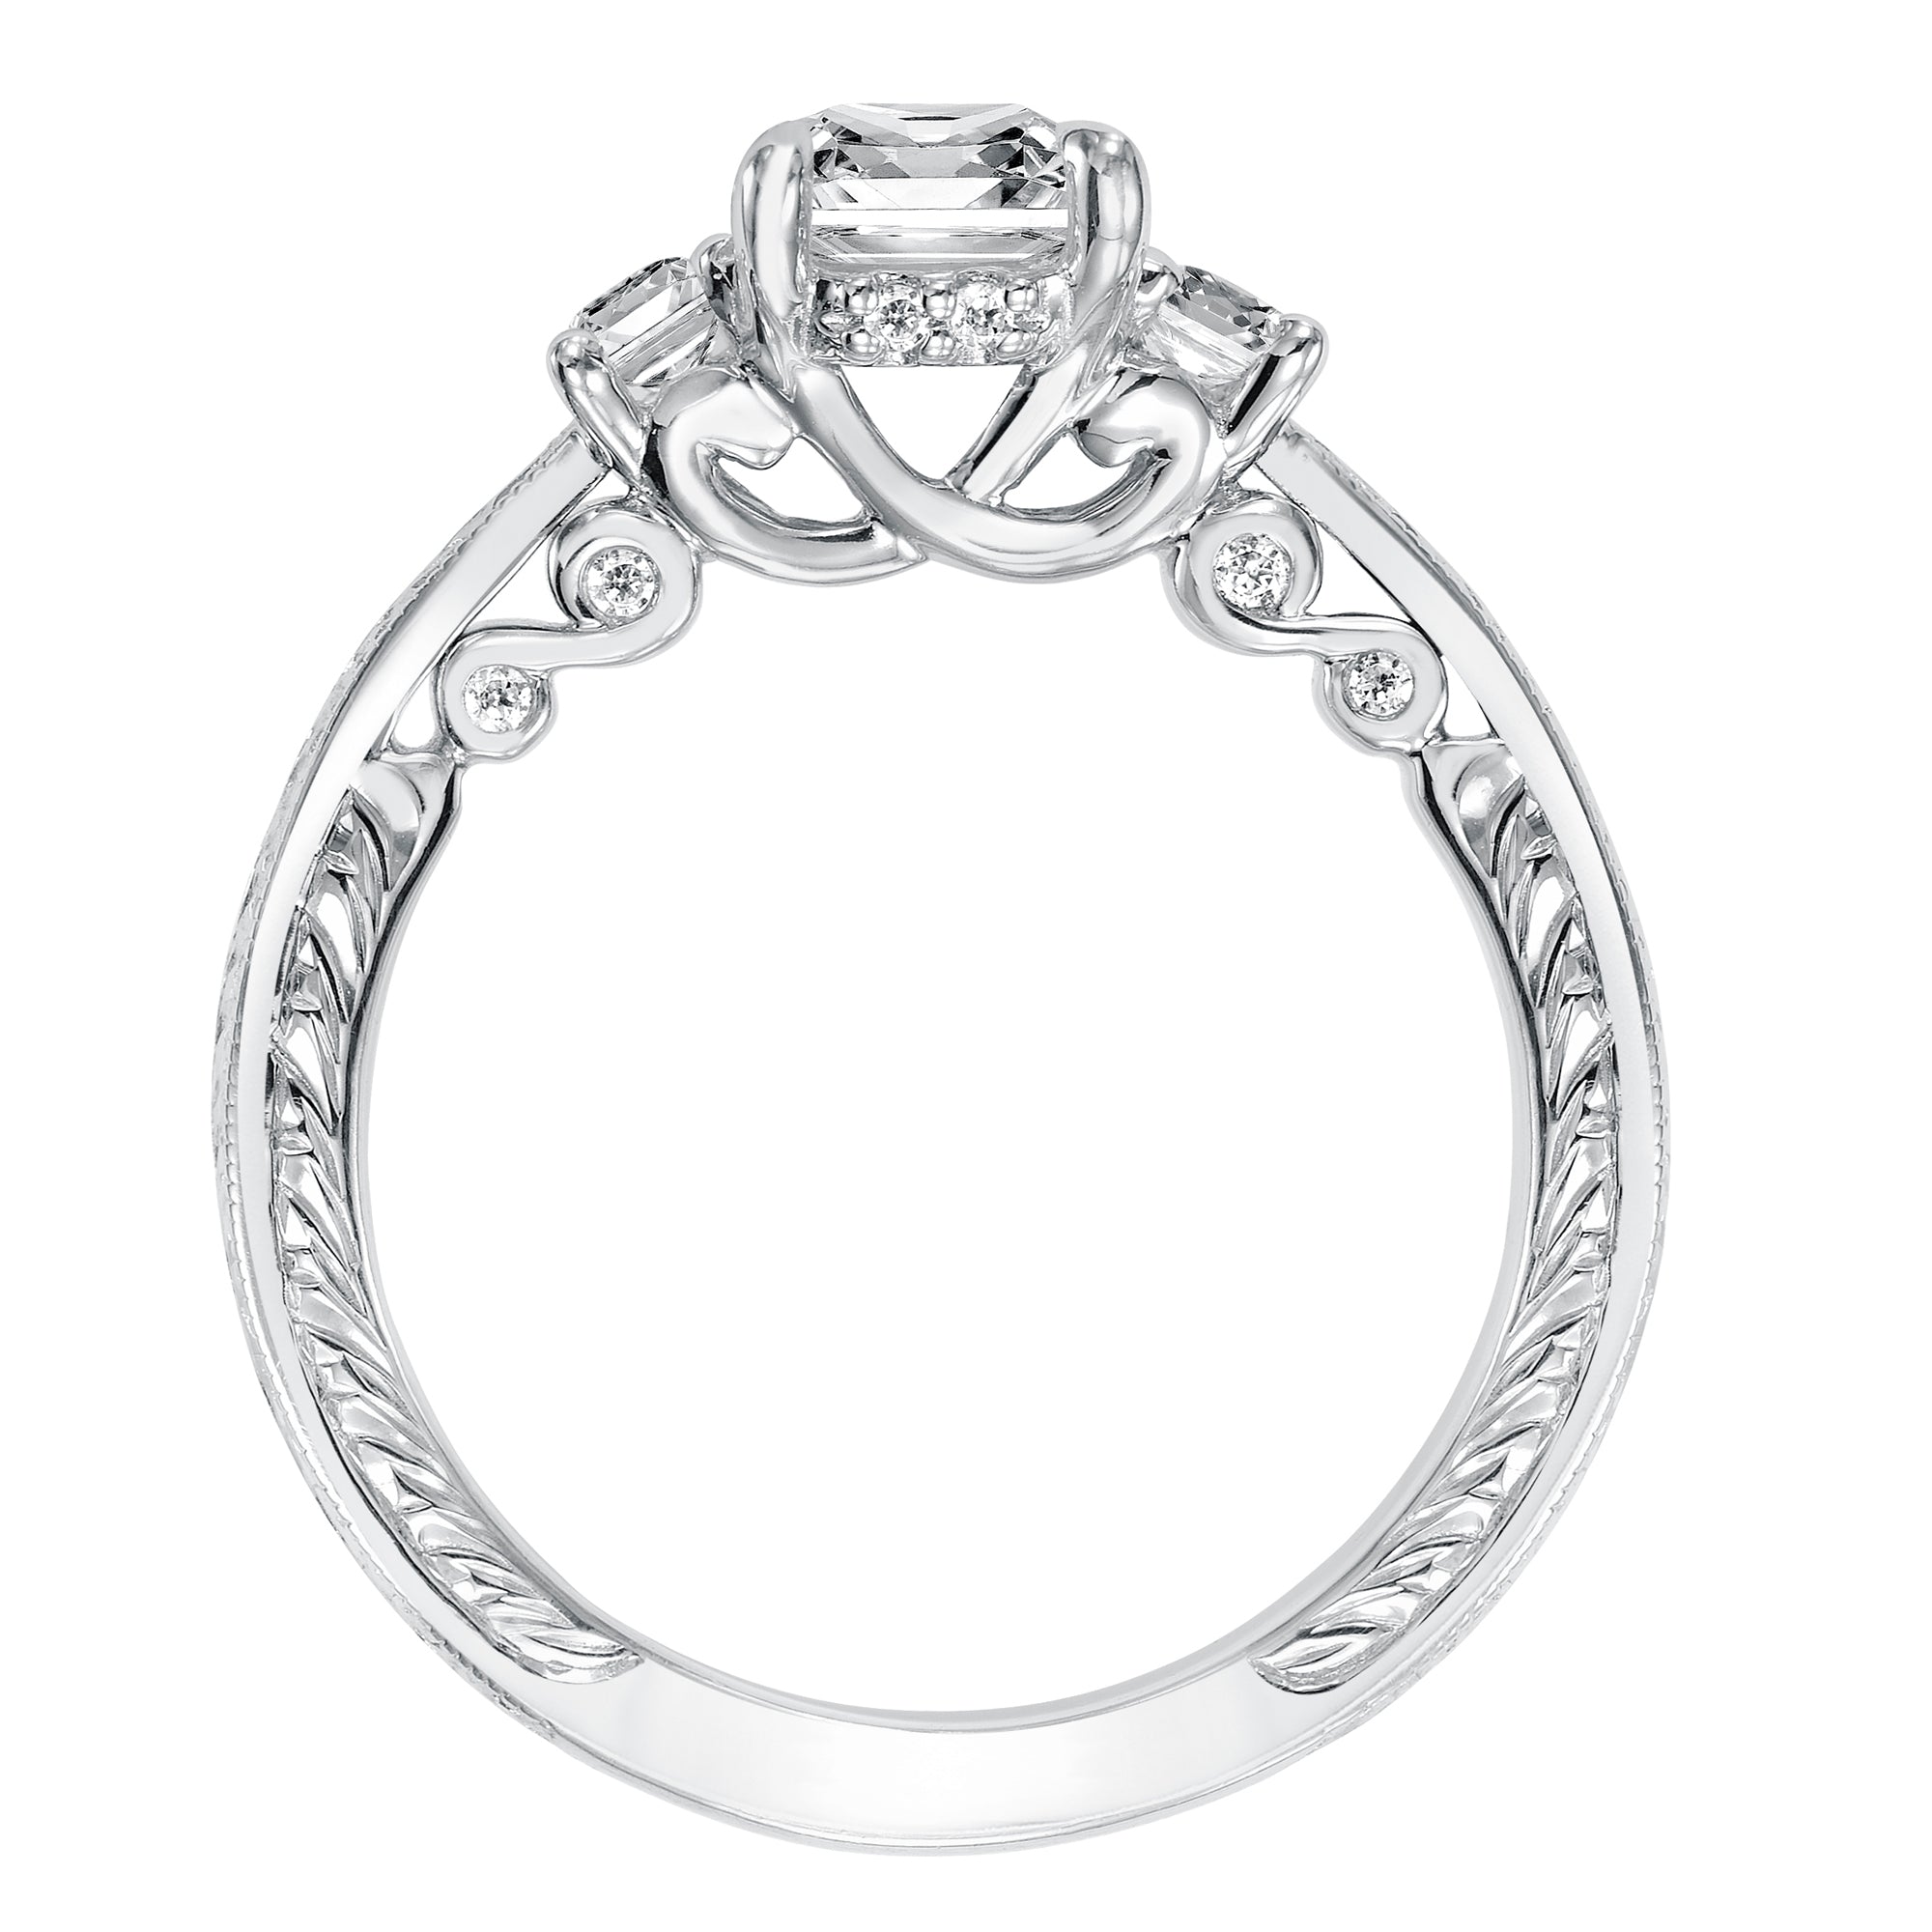 Artcarved Iva Diamond Setting in 14kt White Gold (1/3ct tw)